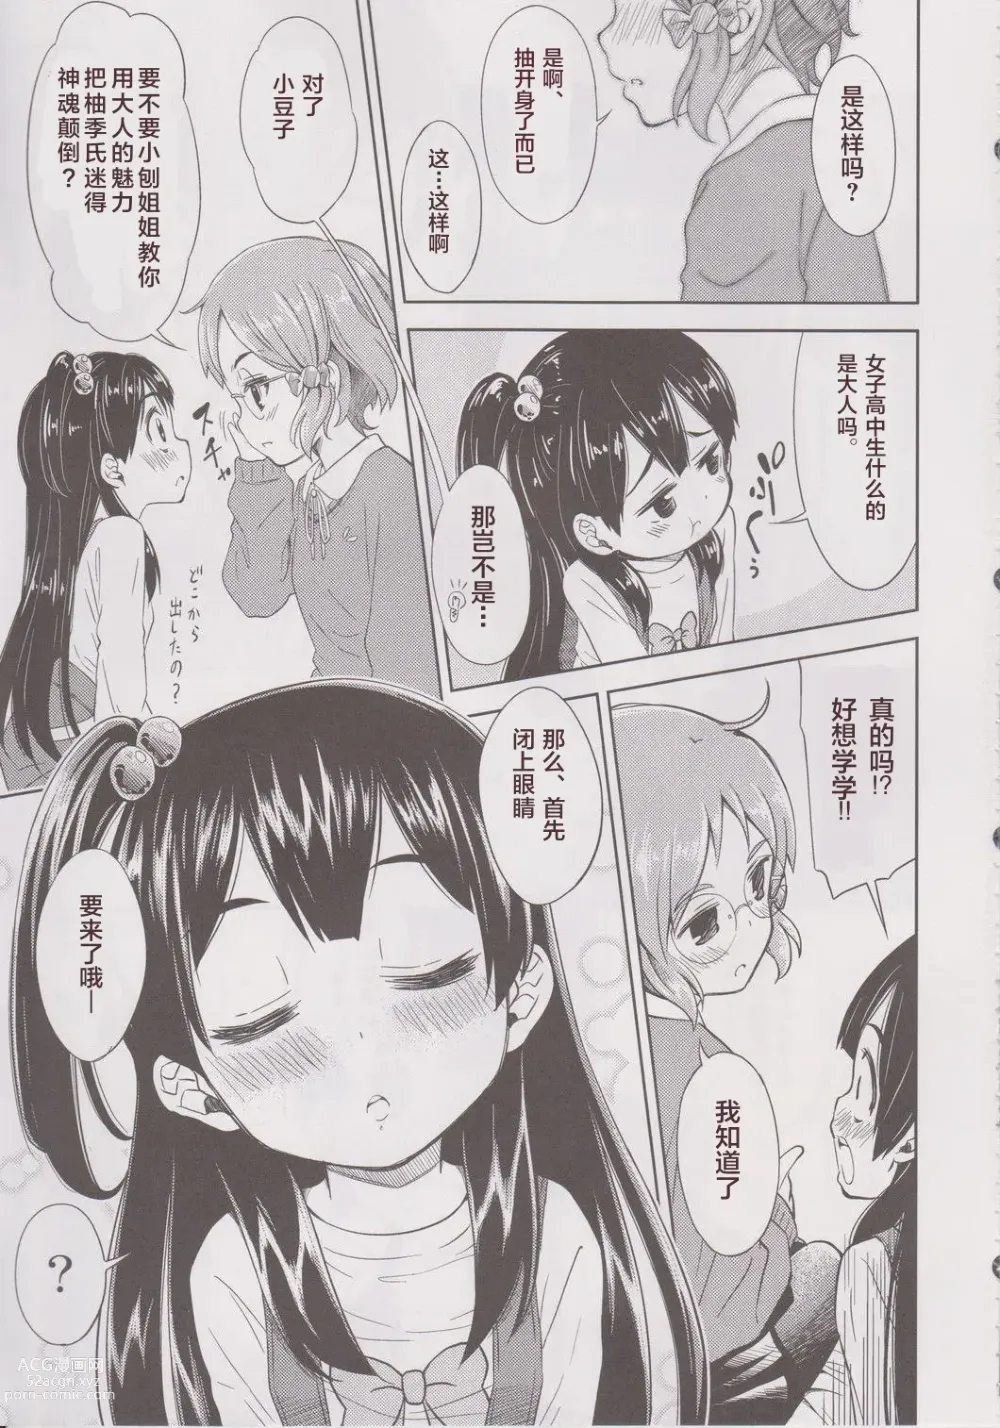 Page 8 of doujinshi Lovely Girls Lily vol. 6